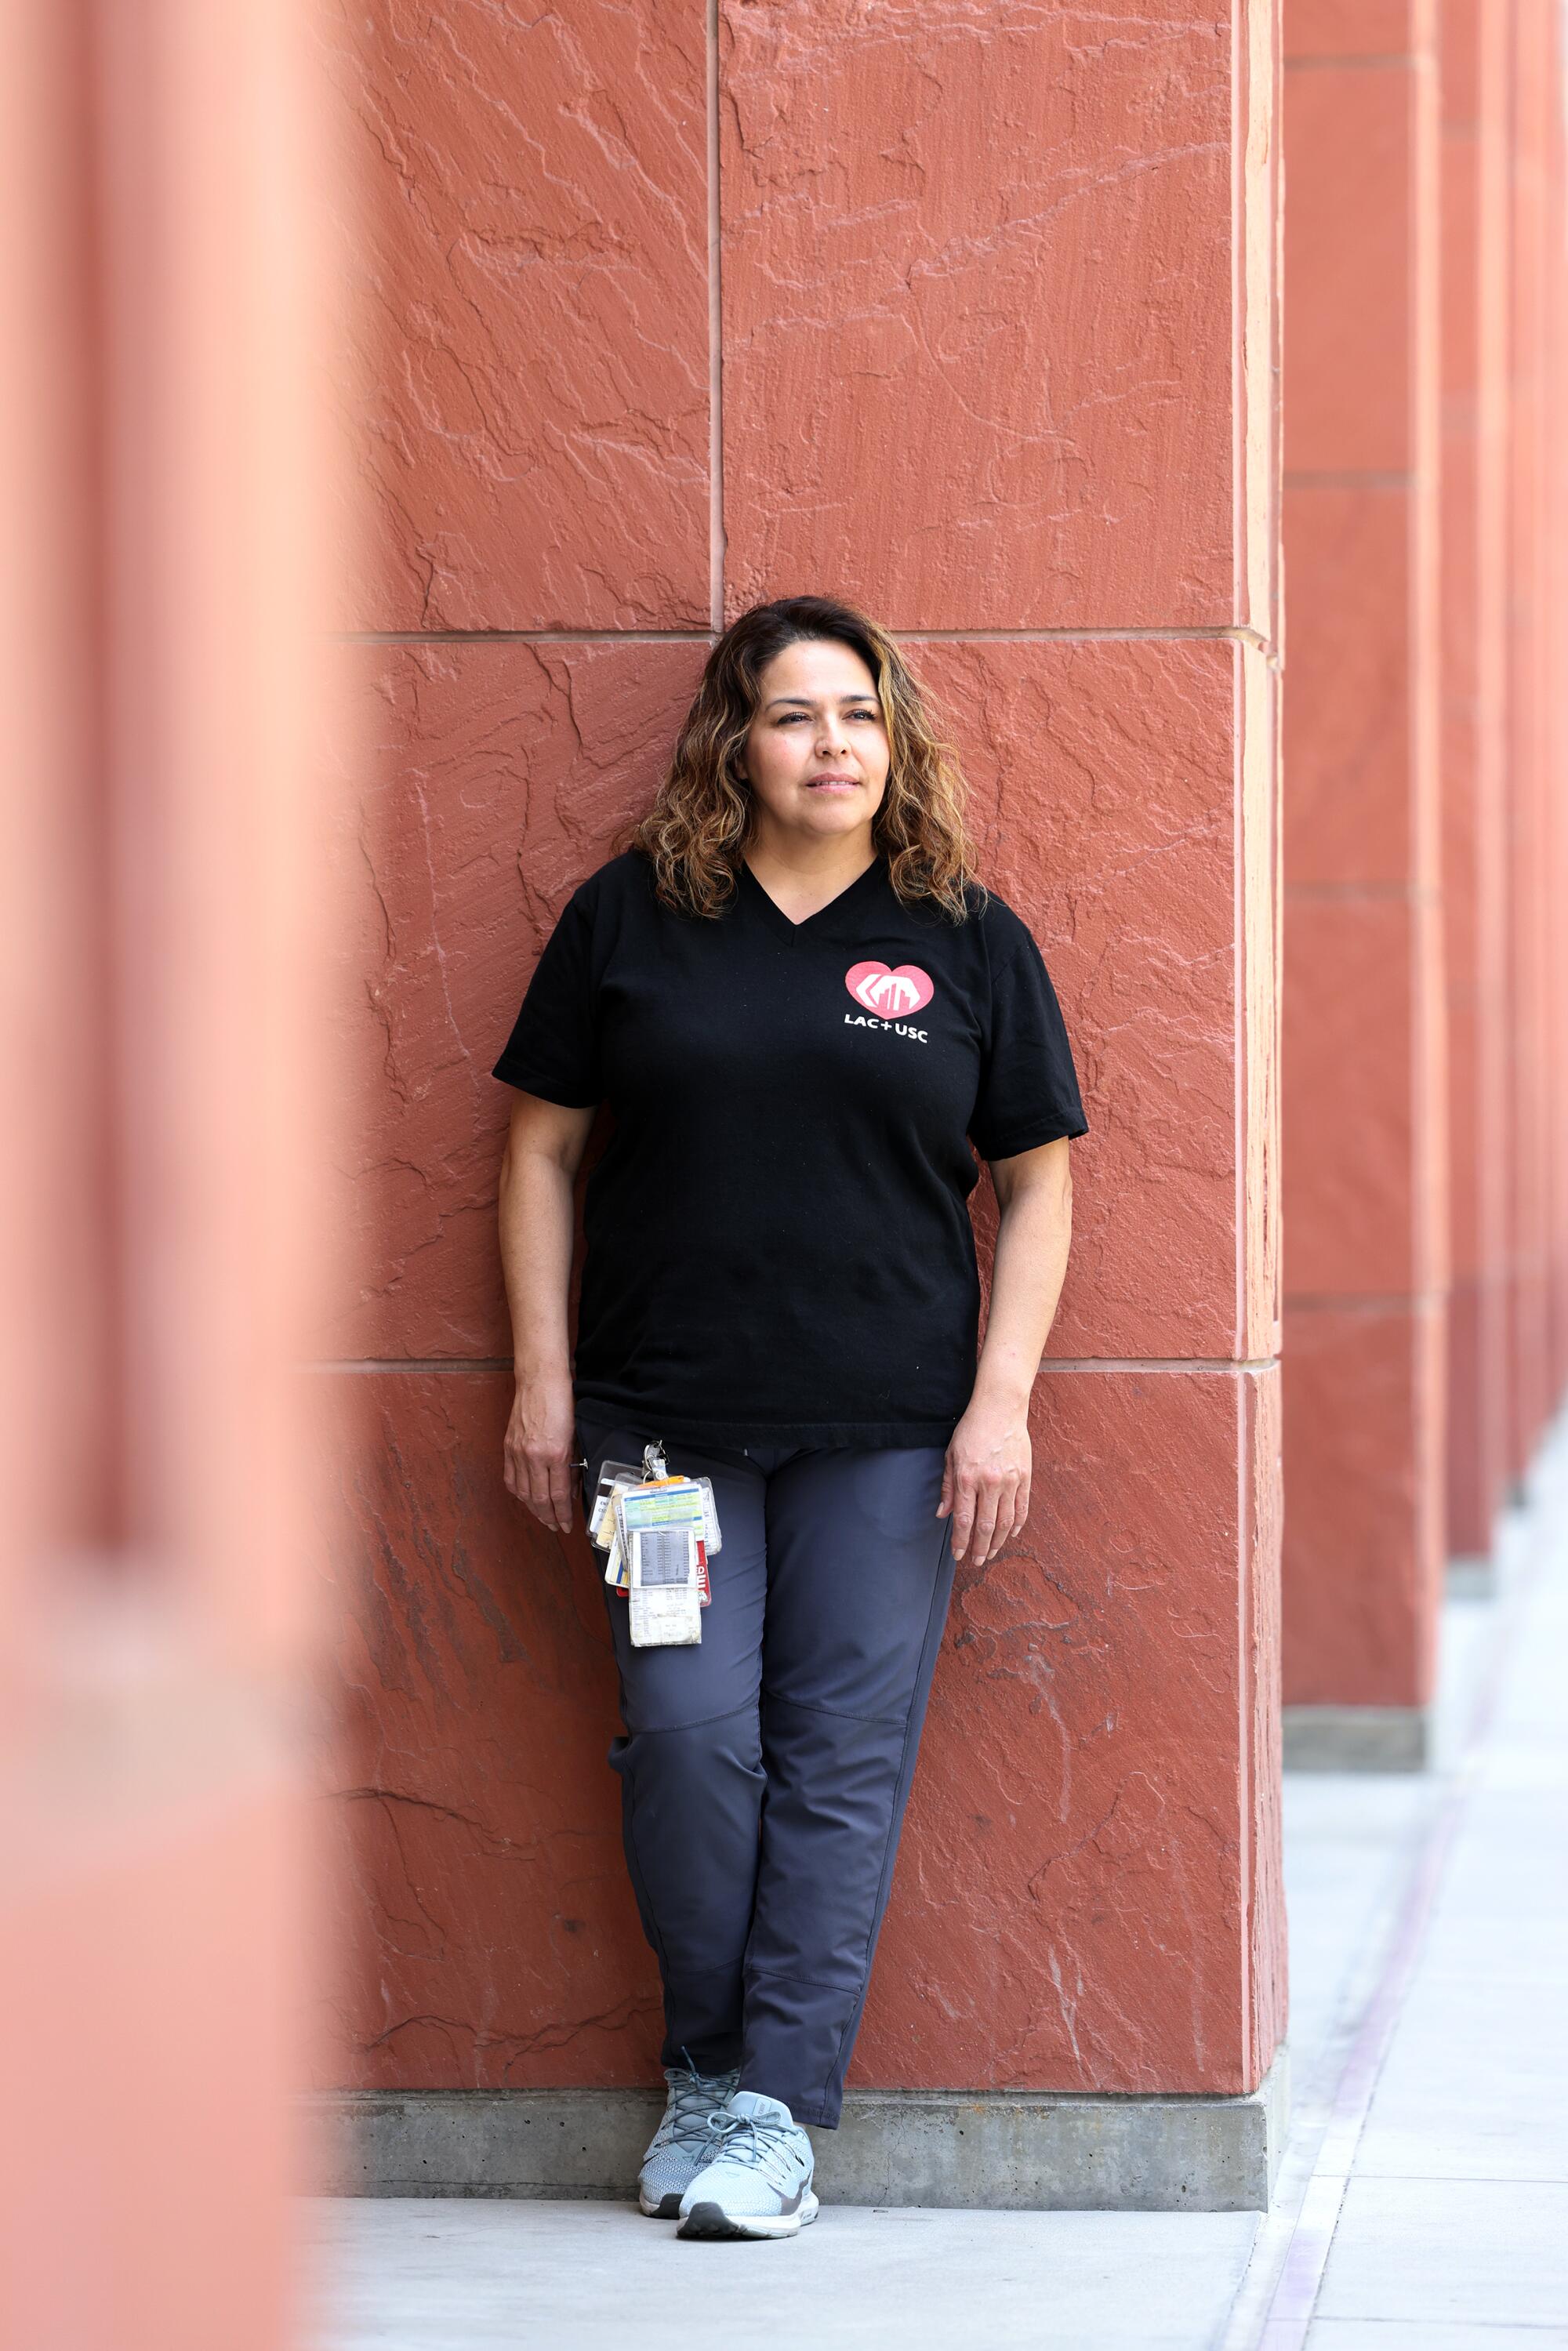 Cecilia Escobedo is a registered nurse who works at L.A. County-USC Medical Center.